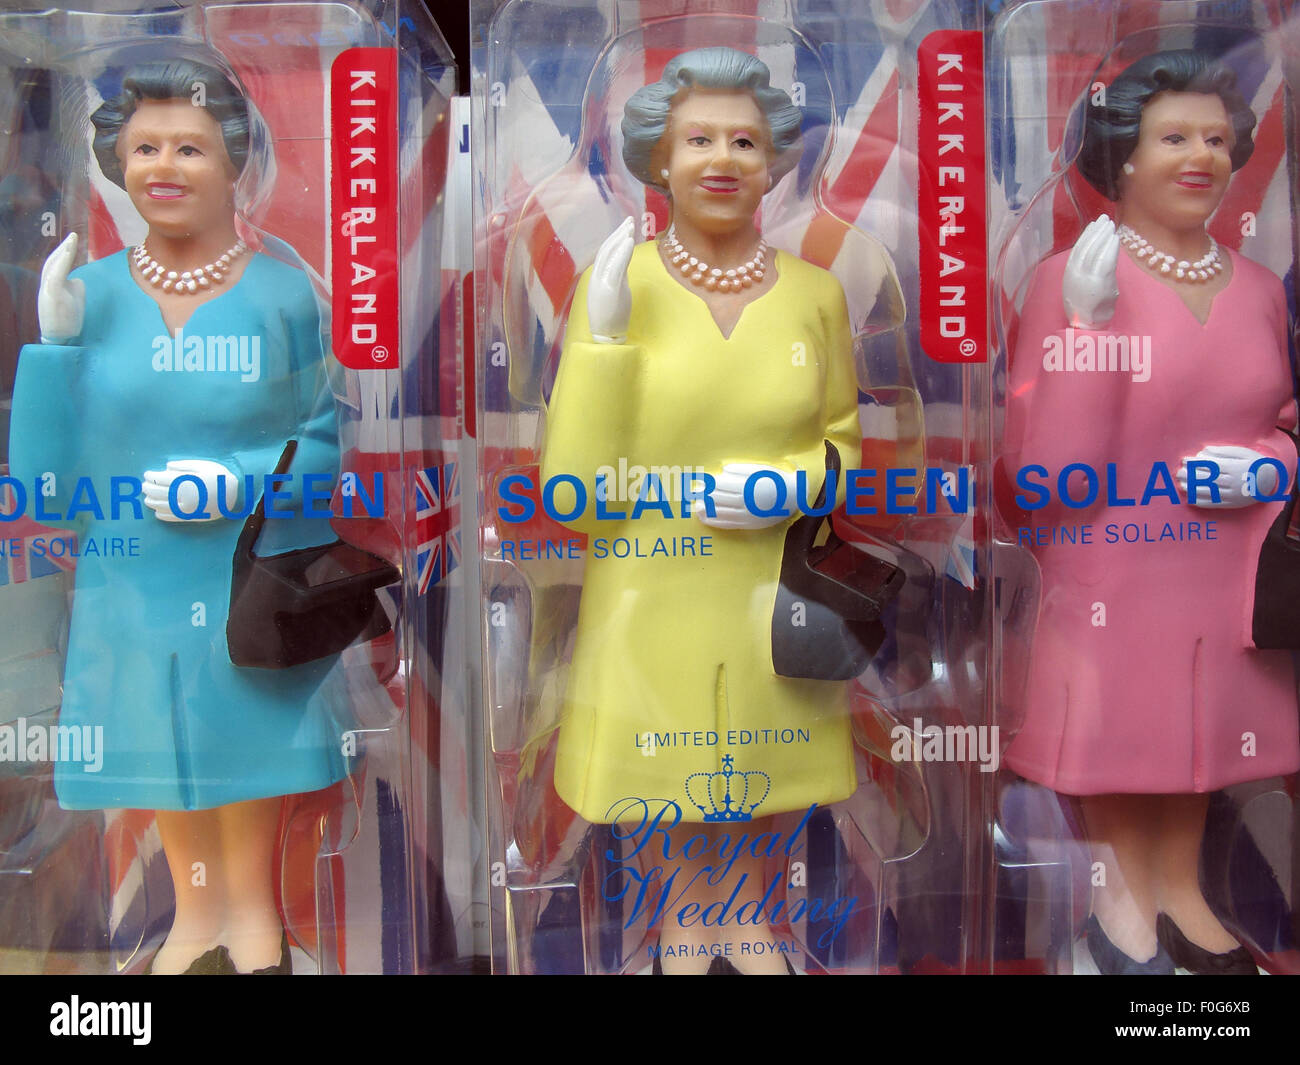 Many Queen Elizabeth of England Solar Powered toys, Mitte, Germany, Europe Stock Photo